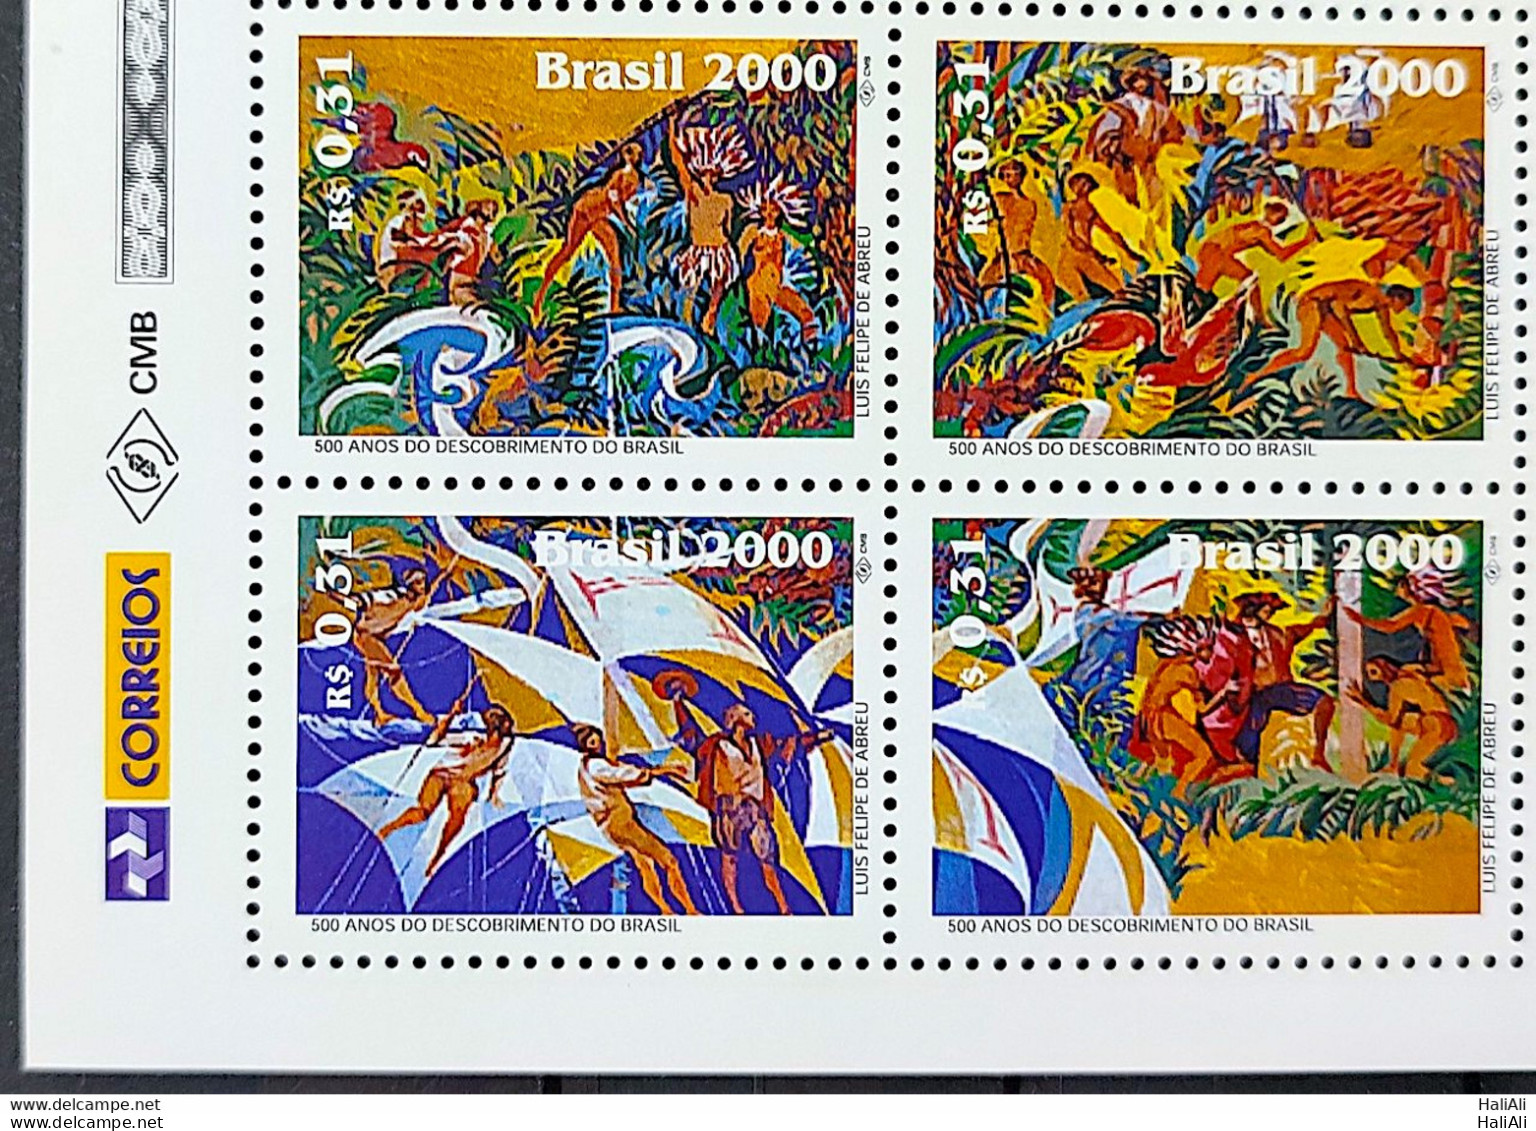 C 2250 Brazil Stamp Discovery Of Brazil Art Indian Portugal 2000 Block Of 4 Vignette Correios - Unused Stamps